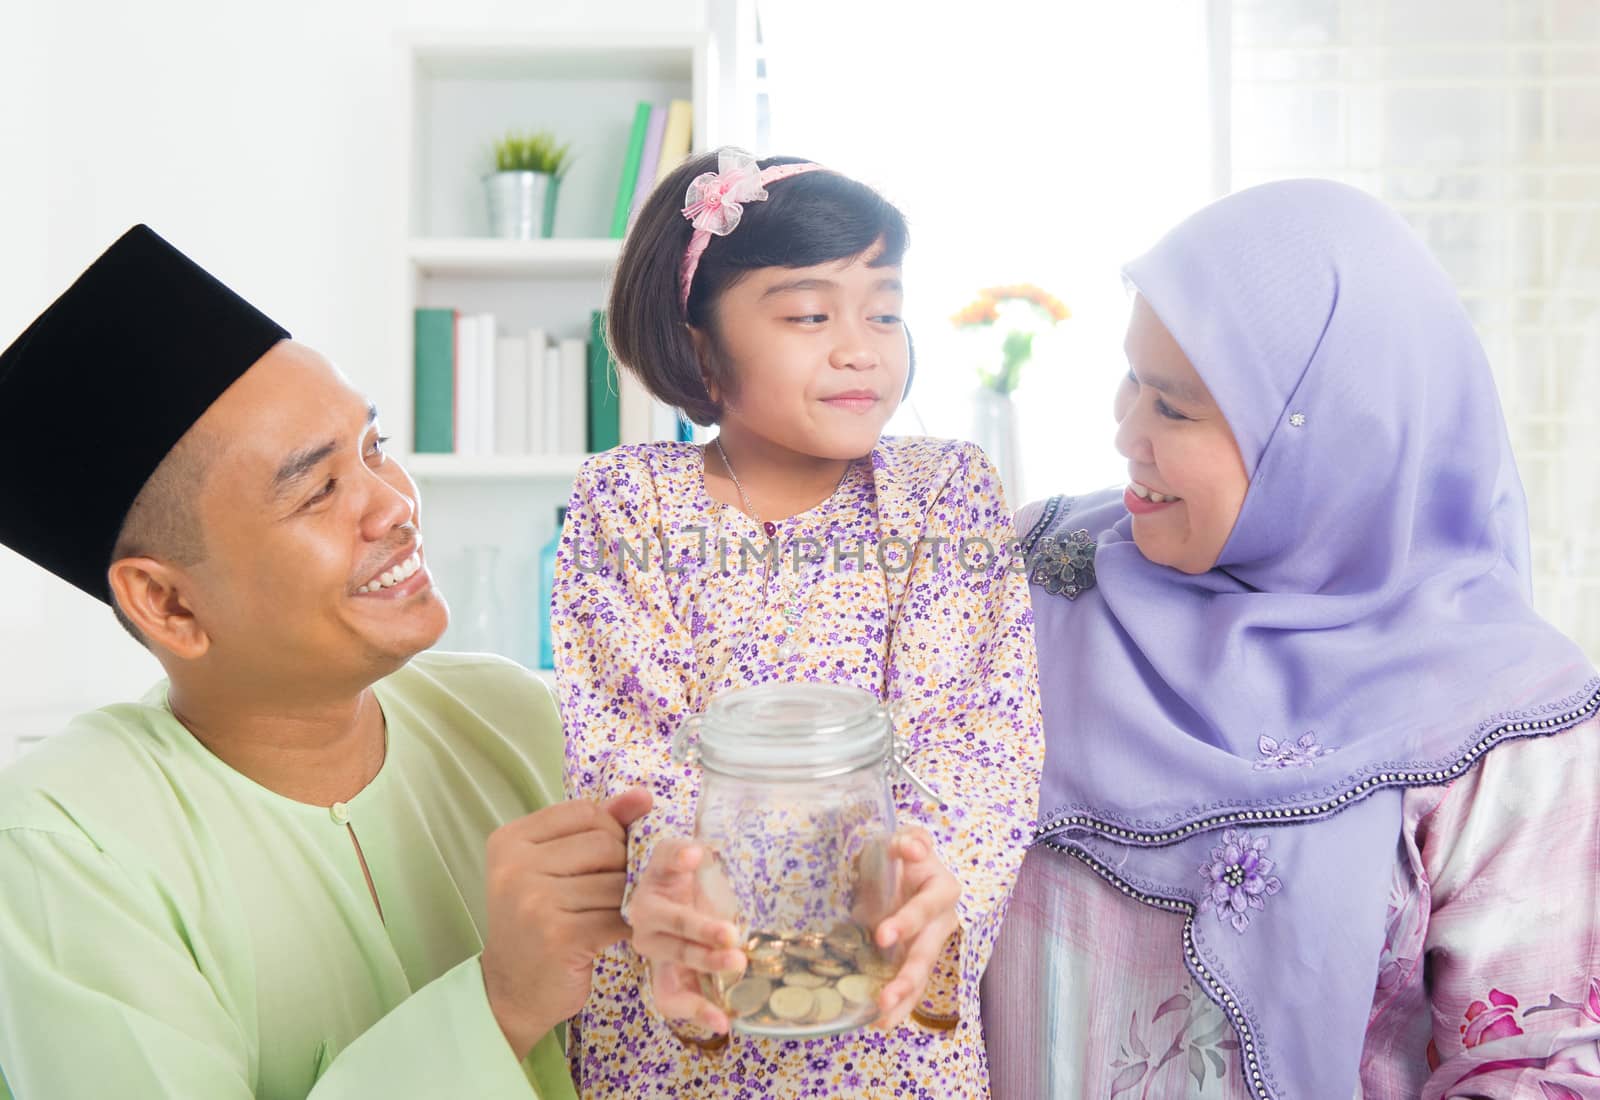 Islamic banking concept. Southeast Asian Malay family saving money at home. Muslim father, mother and daughter living lifestyle.